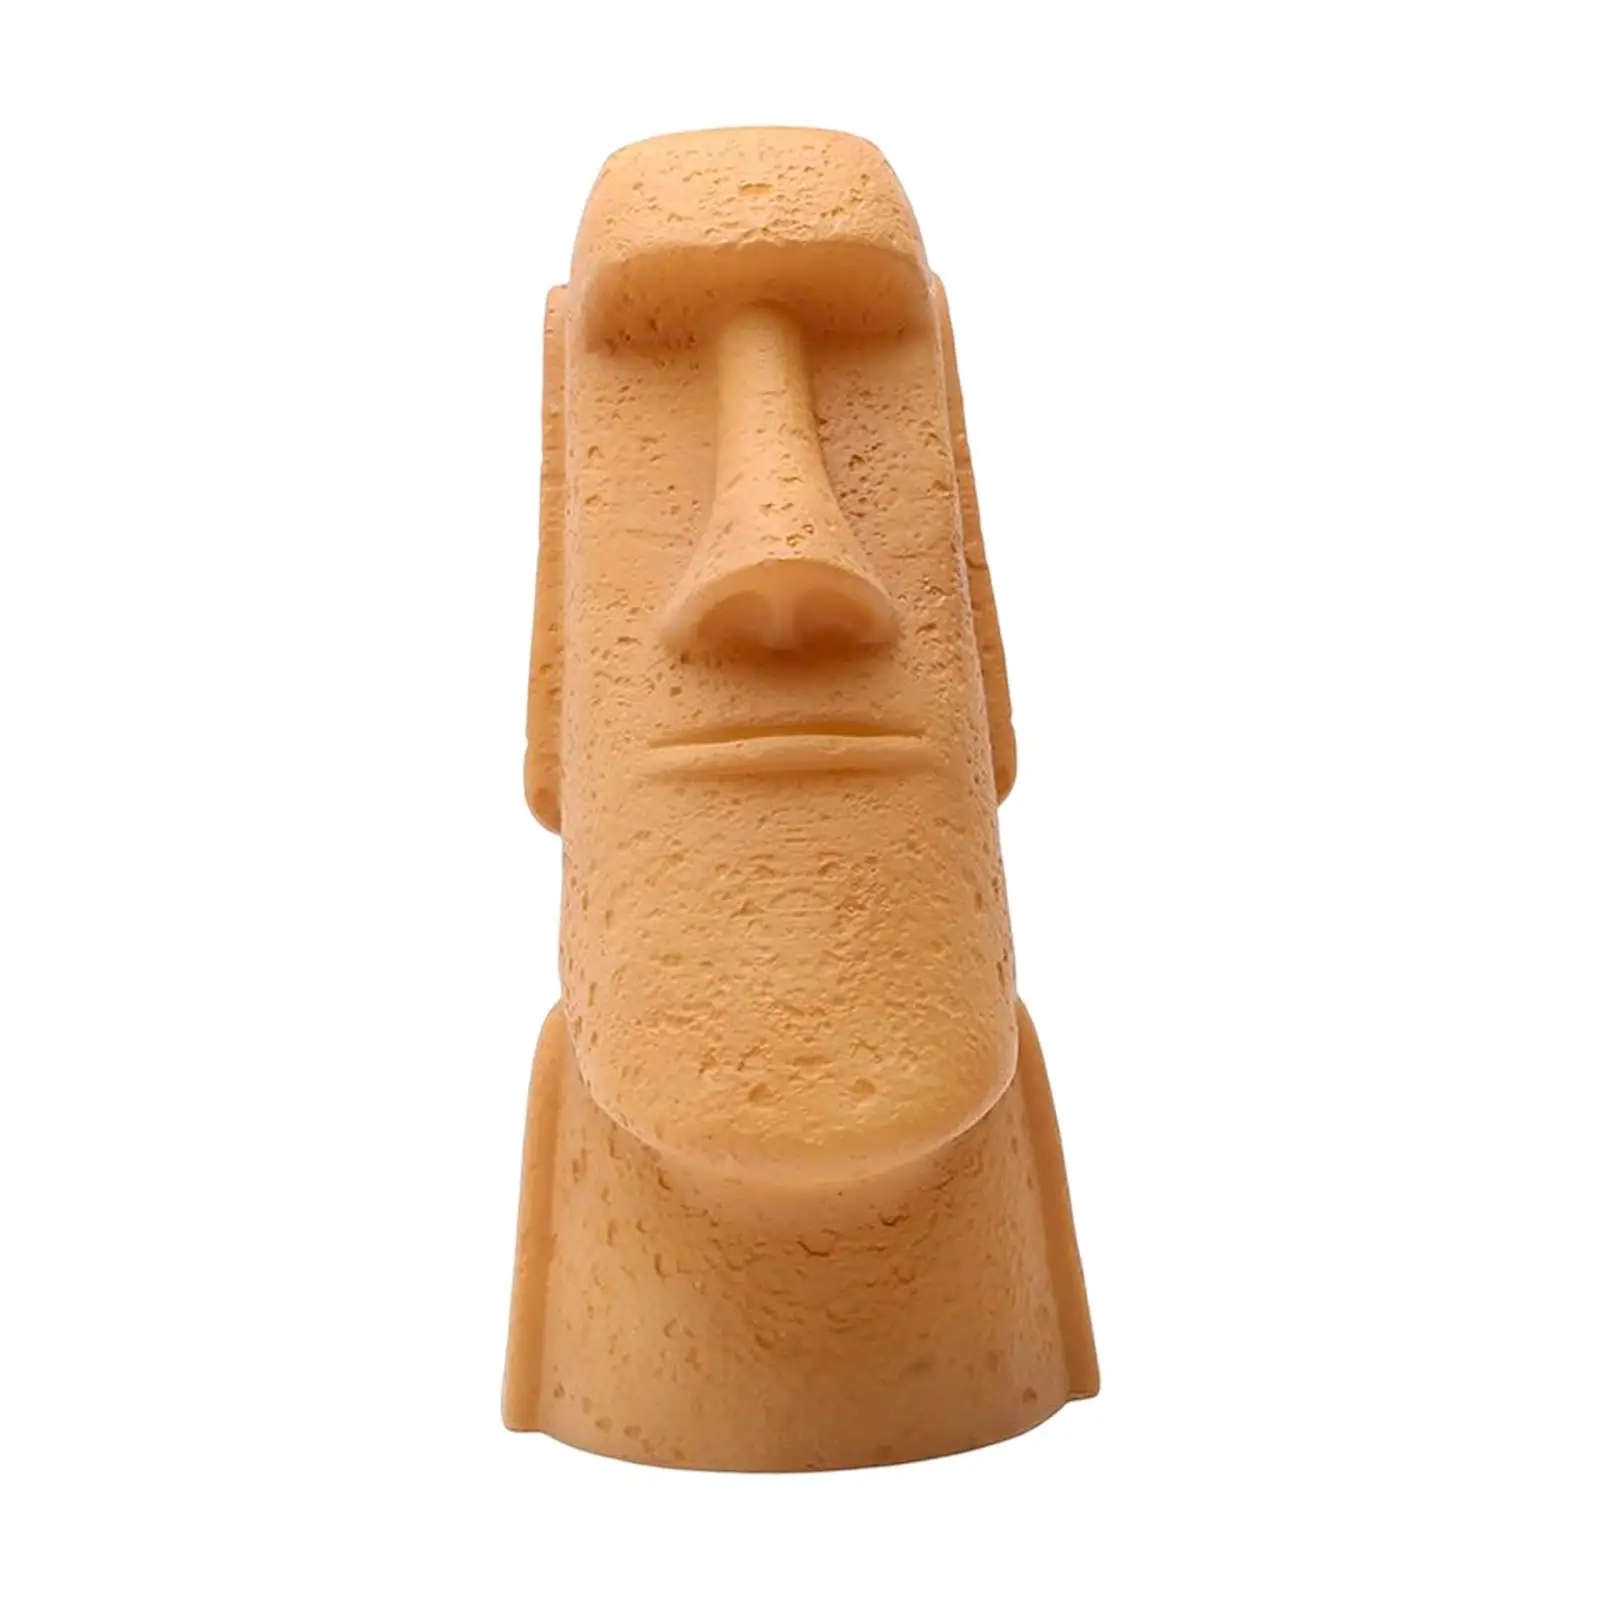 Easter Island Head Statue Light Bedside Lamp Battery Operated Resin Figurine